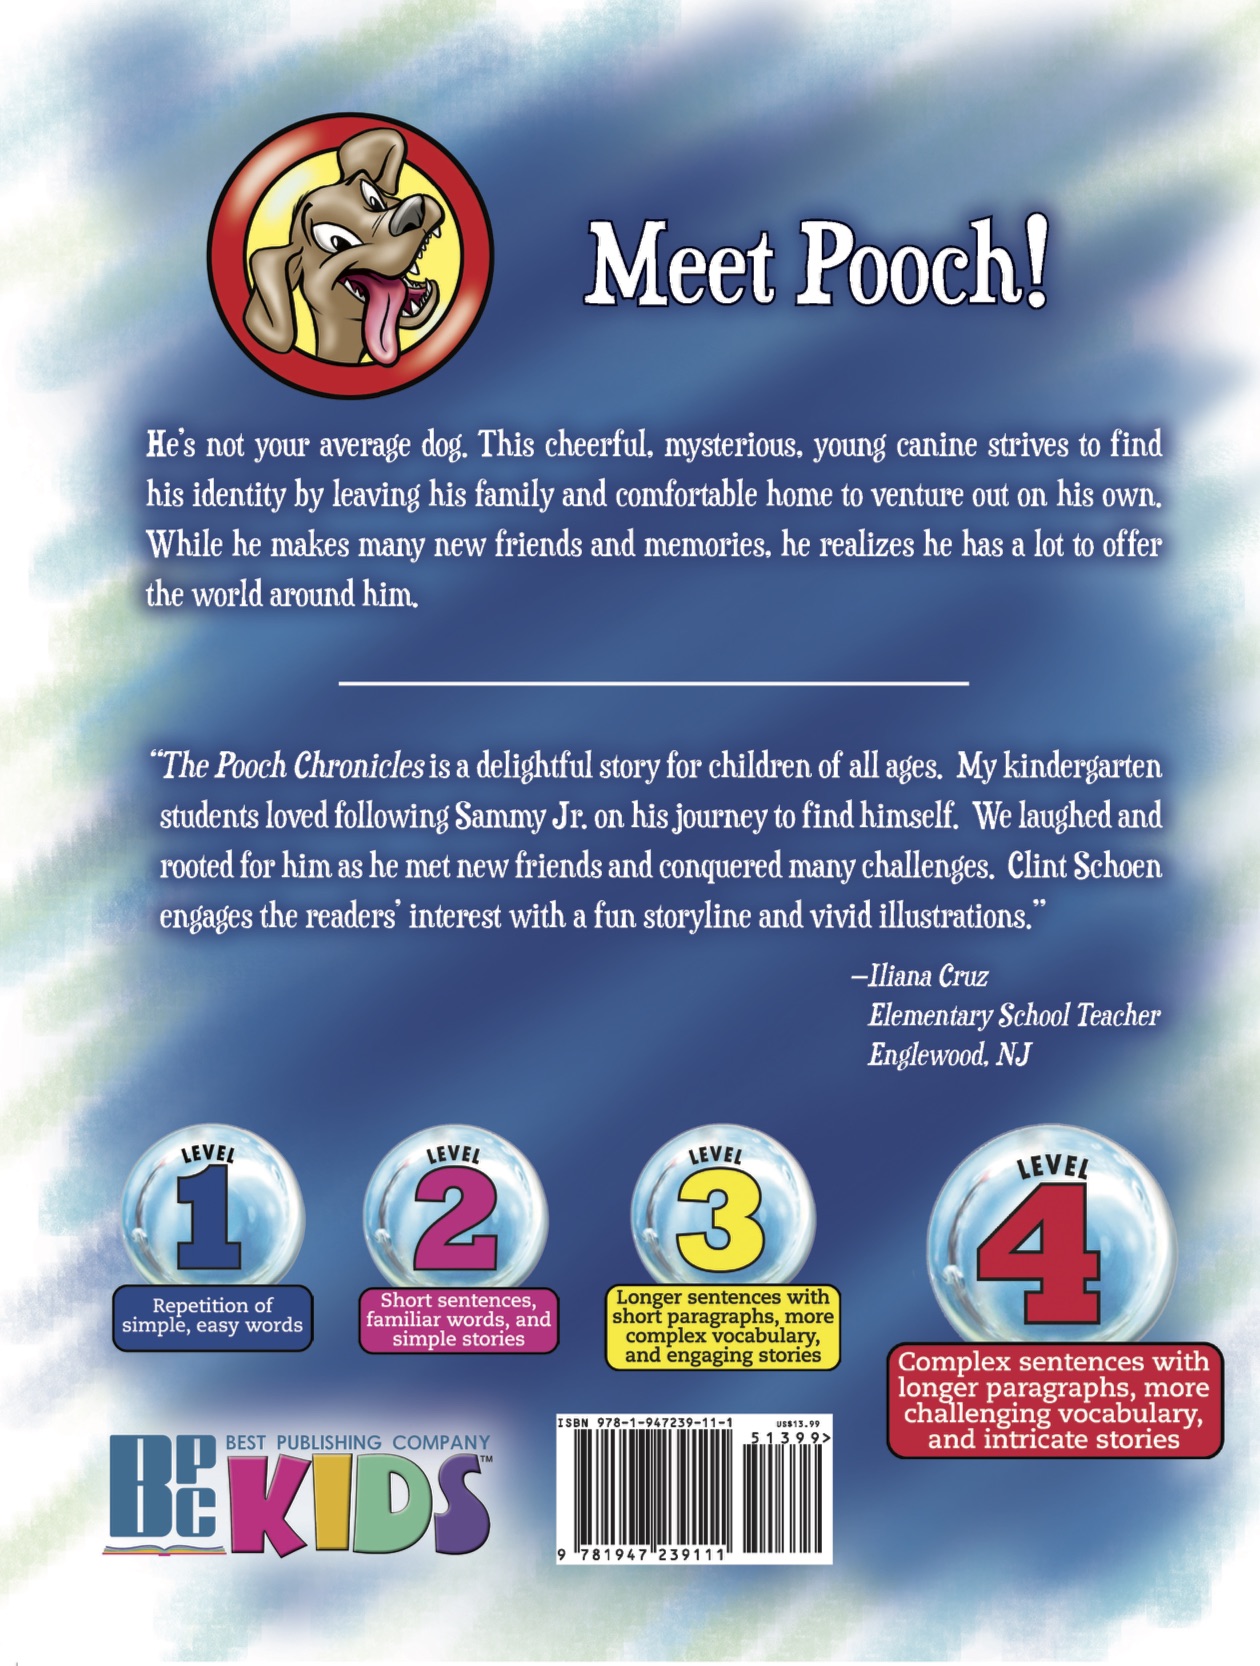 Pooch Chronicles back cover